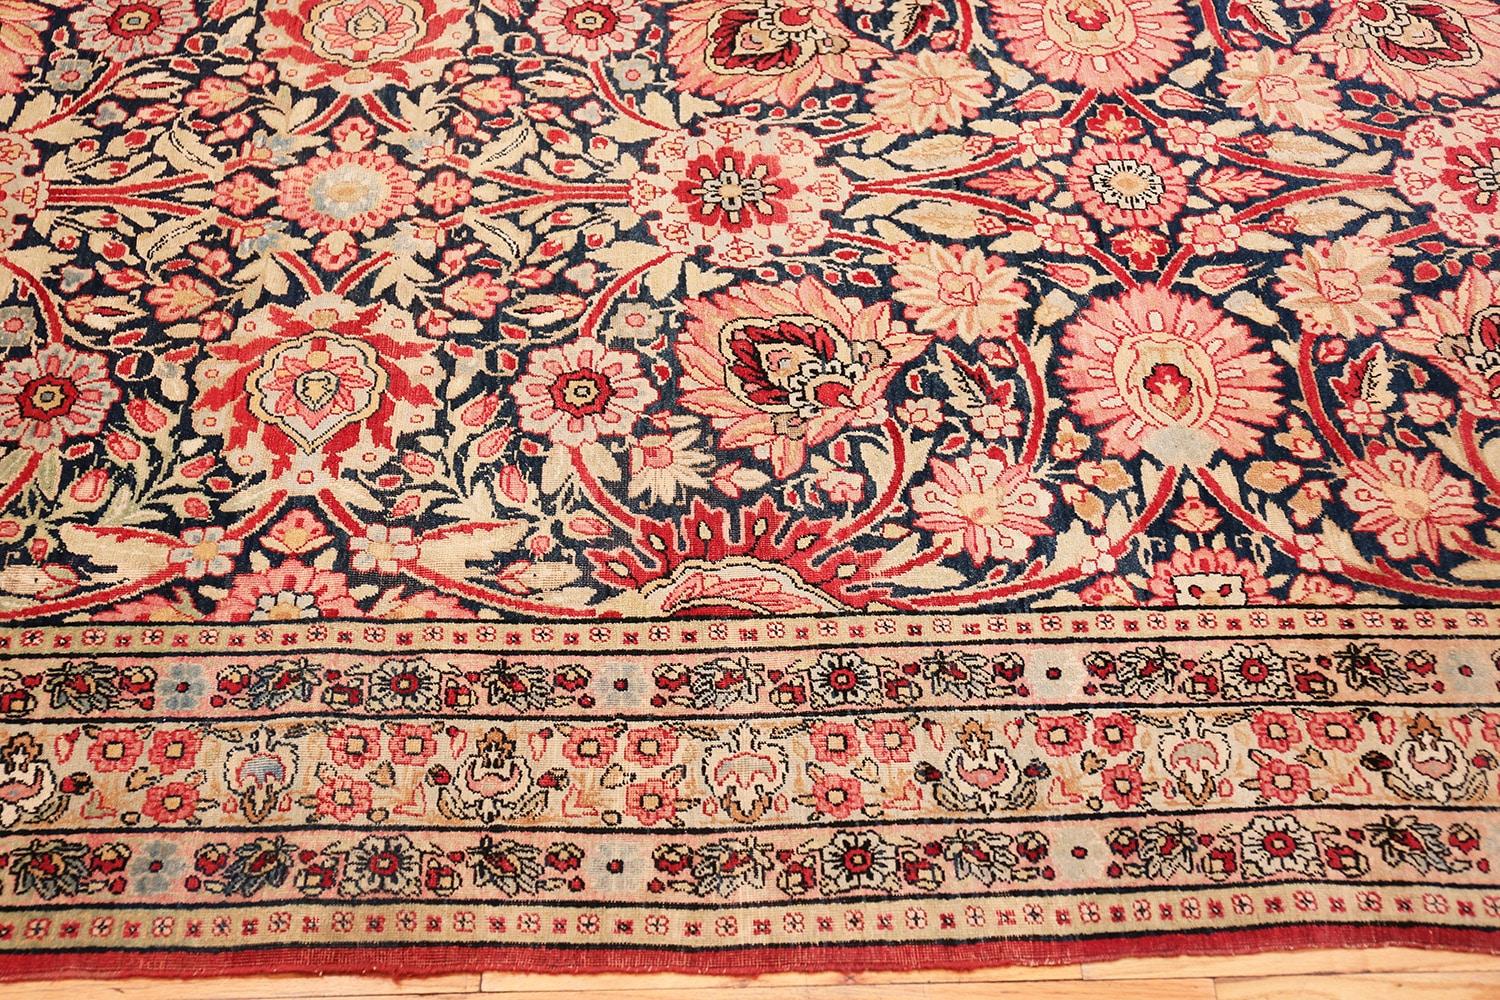 Antique Kerman rug, country of origin: Persia, date circa late 19th century. Size: 4 ft. 8 in x 15 ft. 4 in (1.42 m x 4.67 m)

